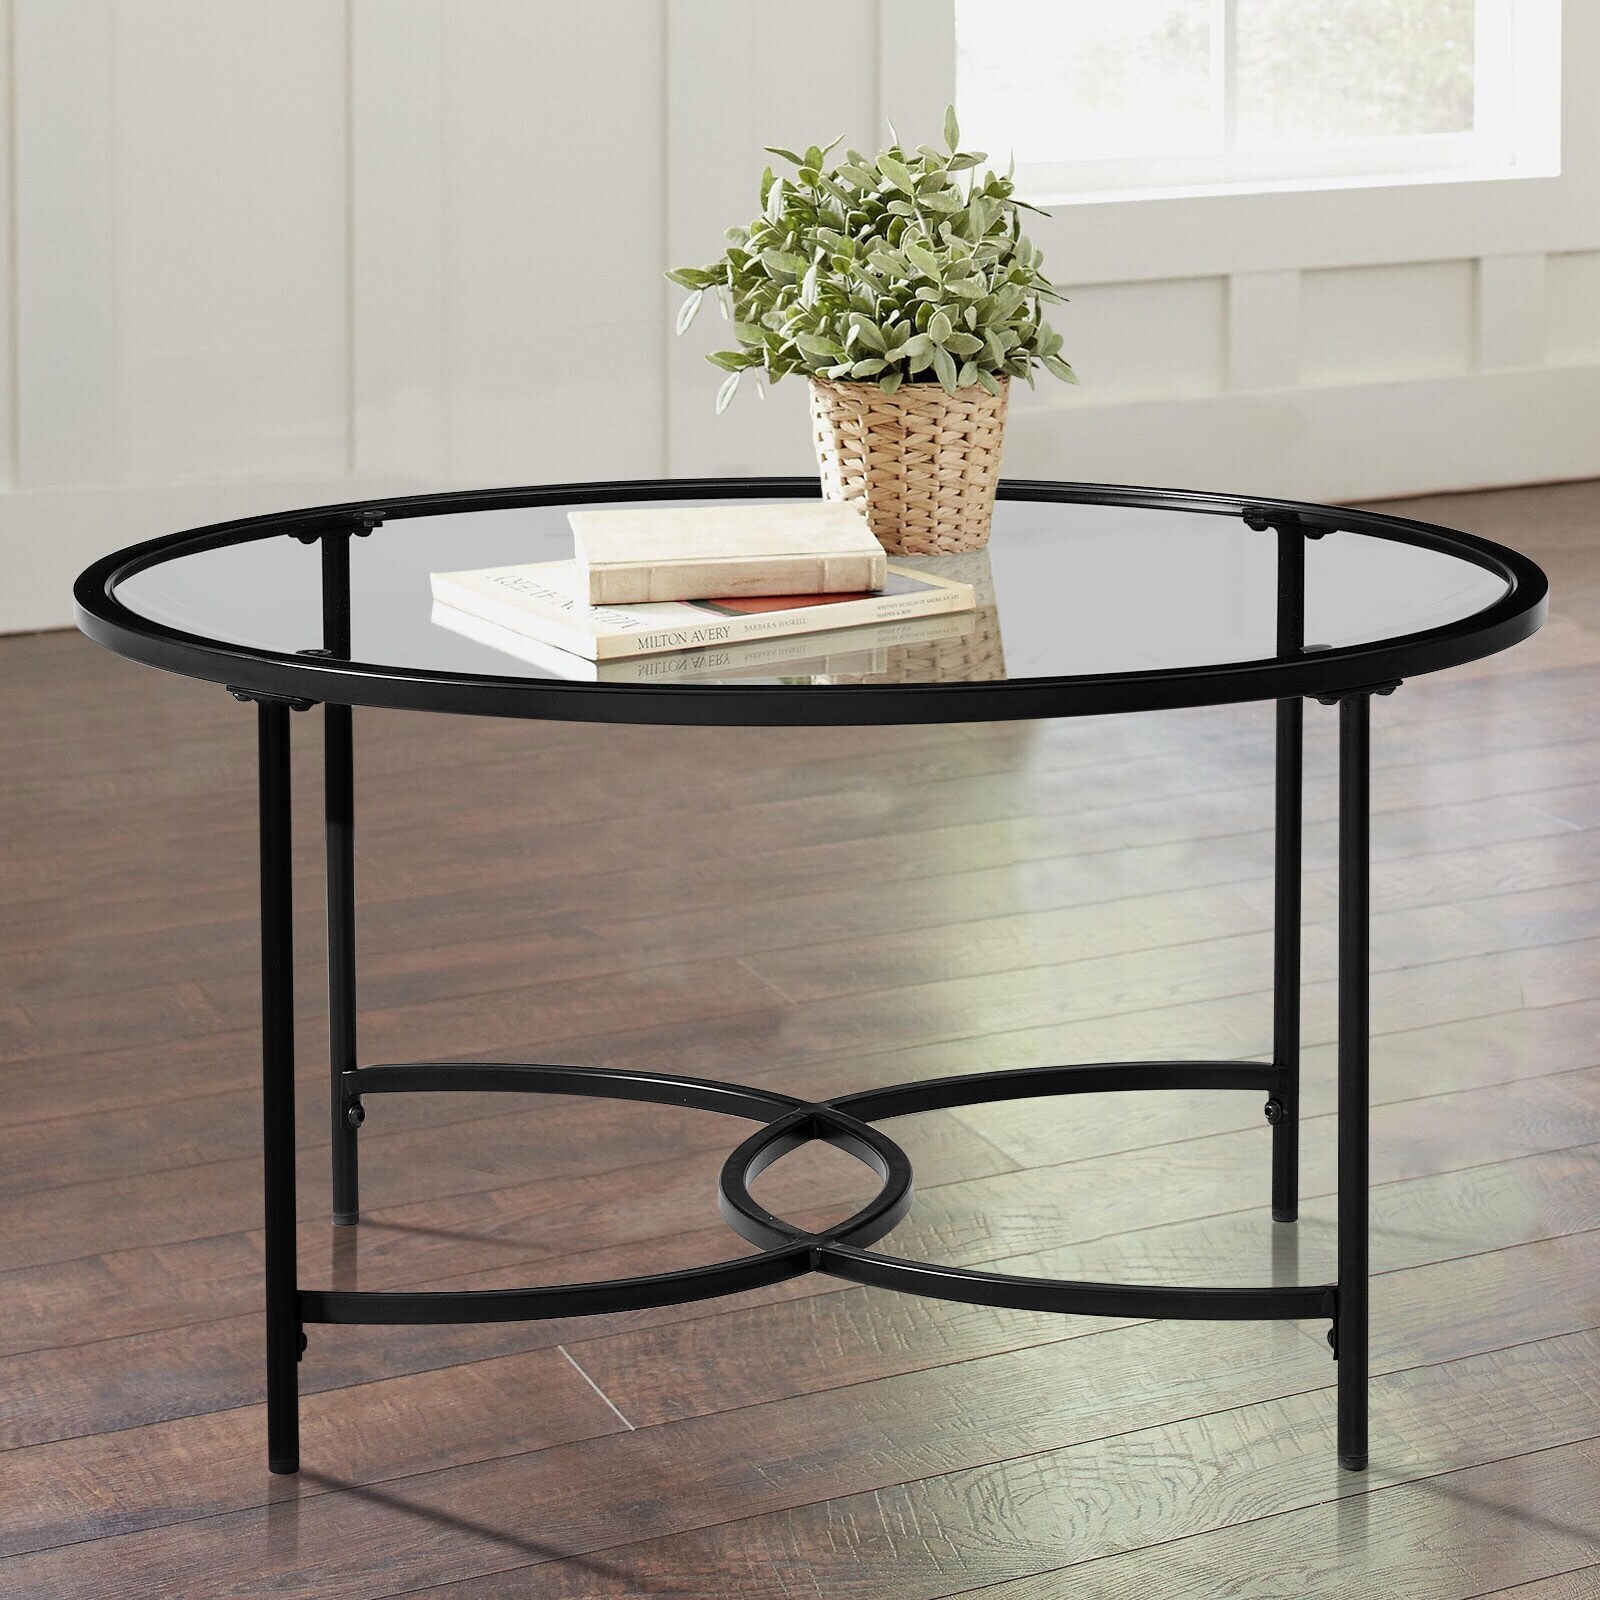 Round wrought iron and glass coffee table